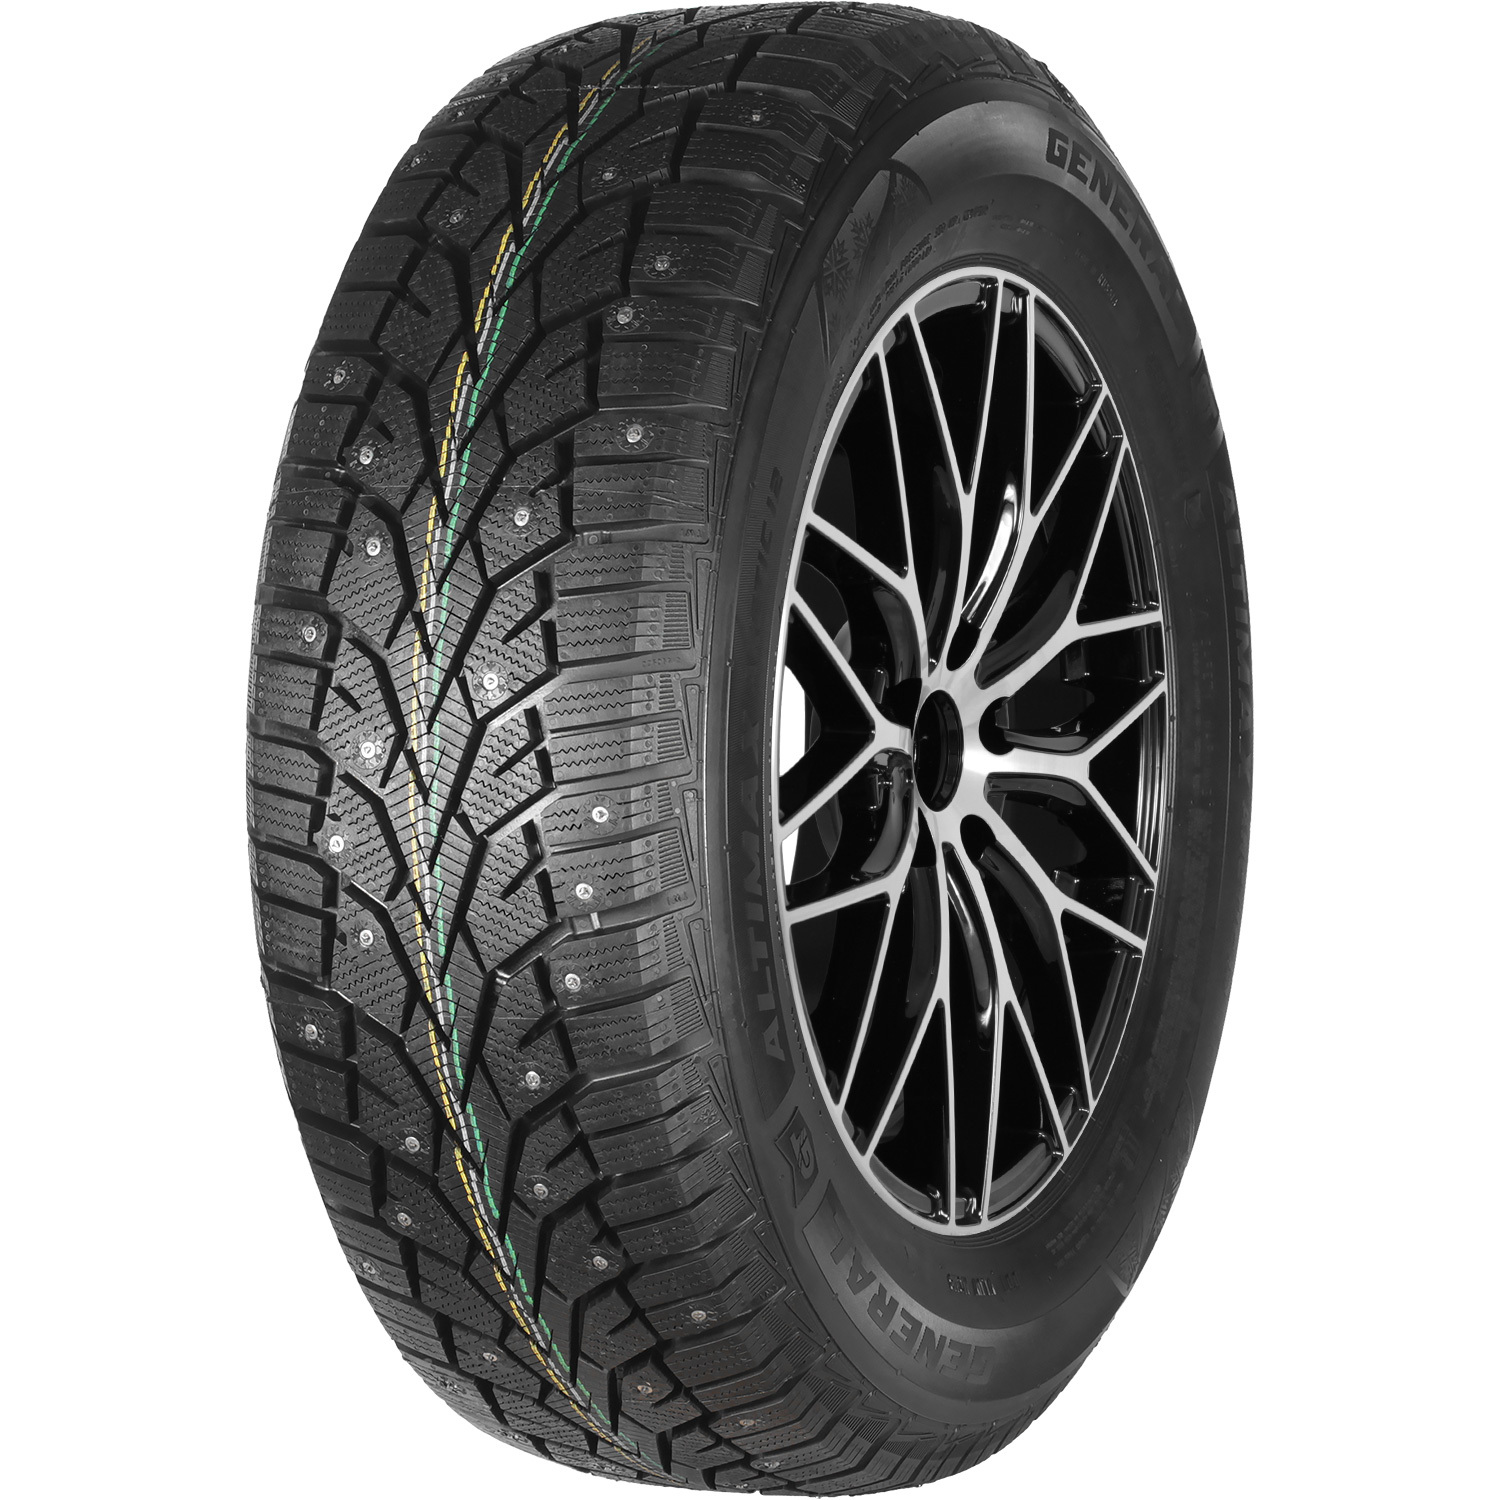 Автомобильная шина General Tire Altimax Arctic 12 215/60 R16 99T Шипованные tire cover central ocean sunrise sun moon spare tire cover select tire size back up camera in menu custom sized to any